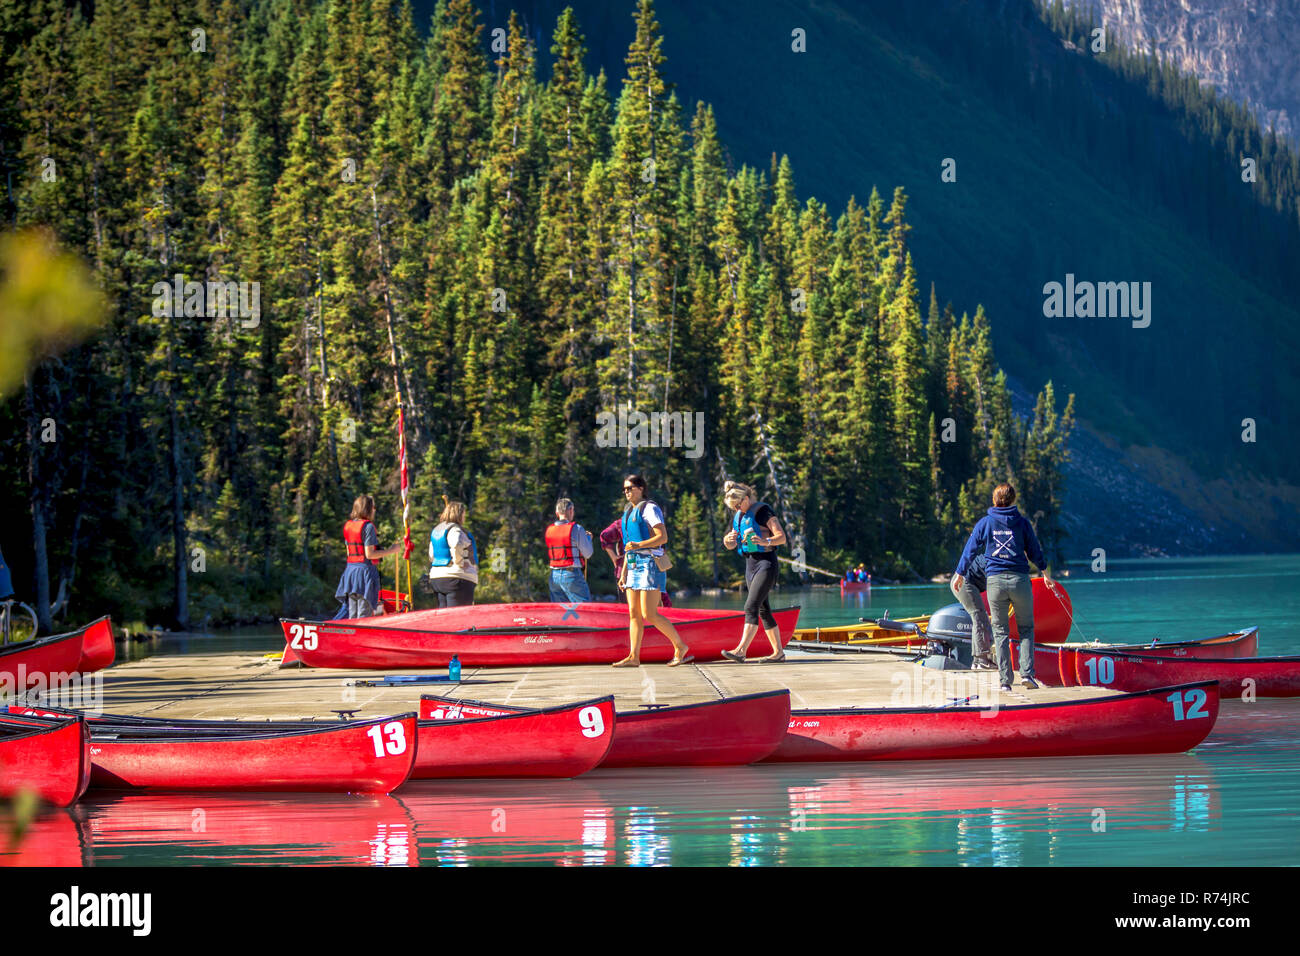 Banff, Canada - Sep 13th 2018 - Group of tourists renting kayaks with pine trees around it at Lake Louise in Canada Stock Photo